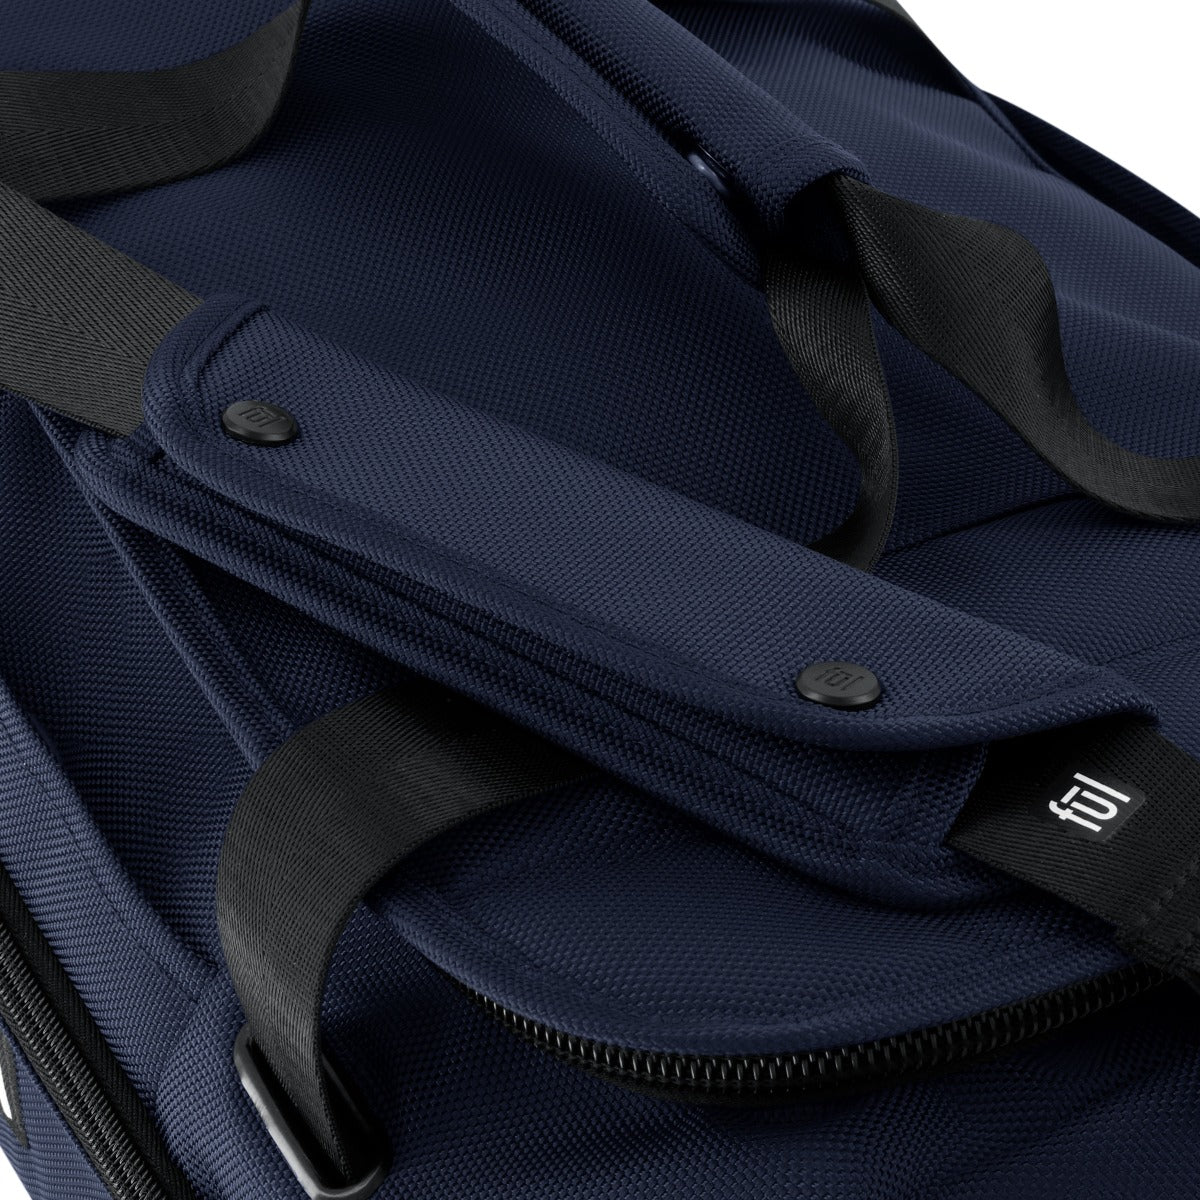 ful tactics collection siege duffle bag navy blue - best duffel bags for travel